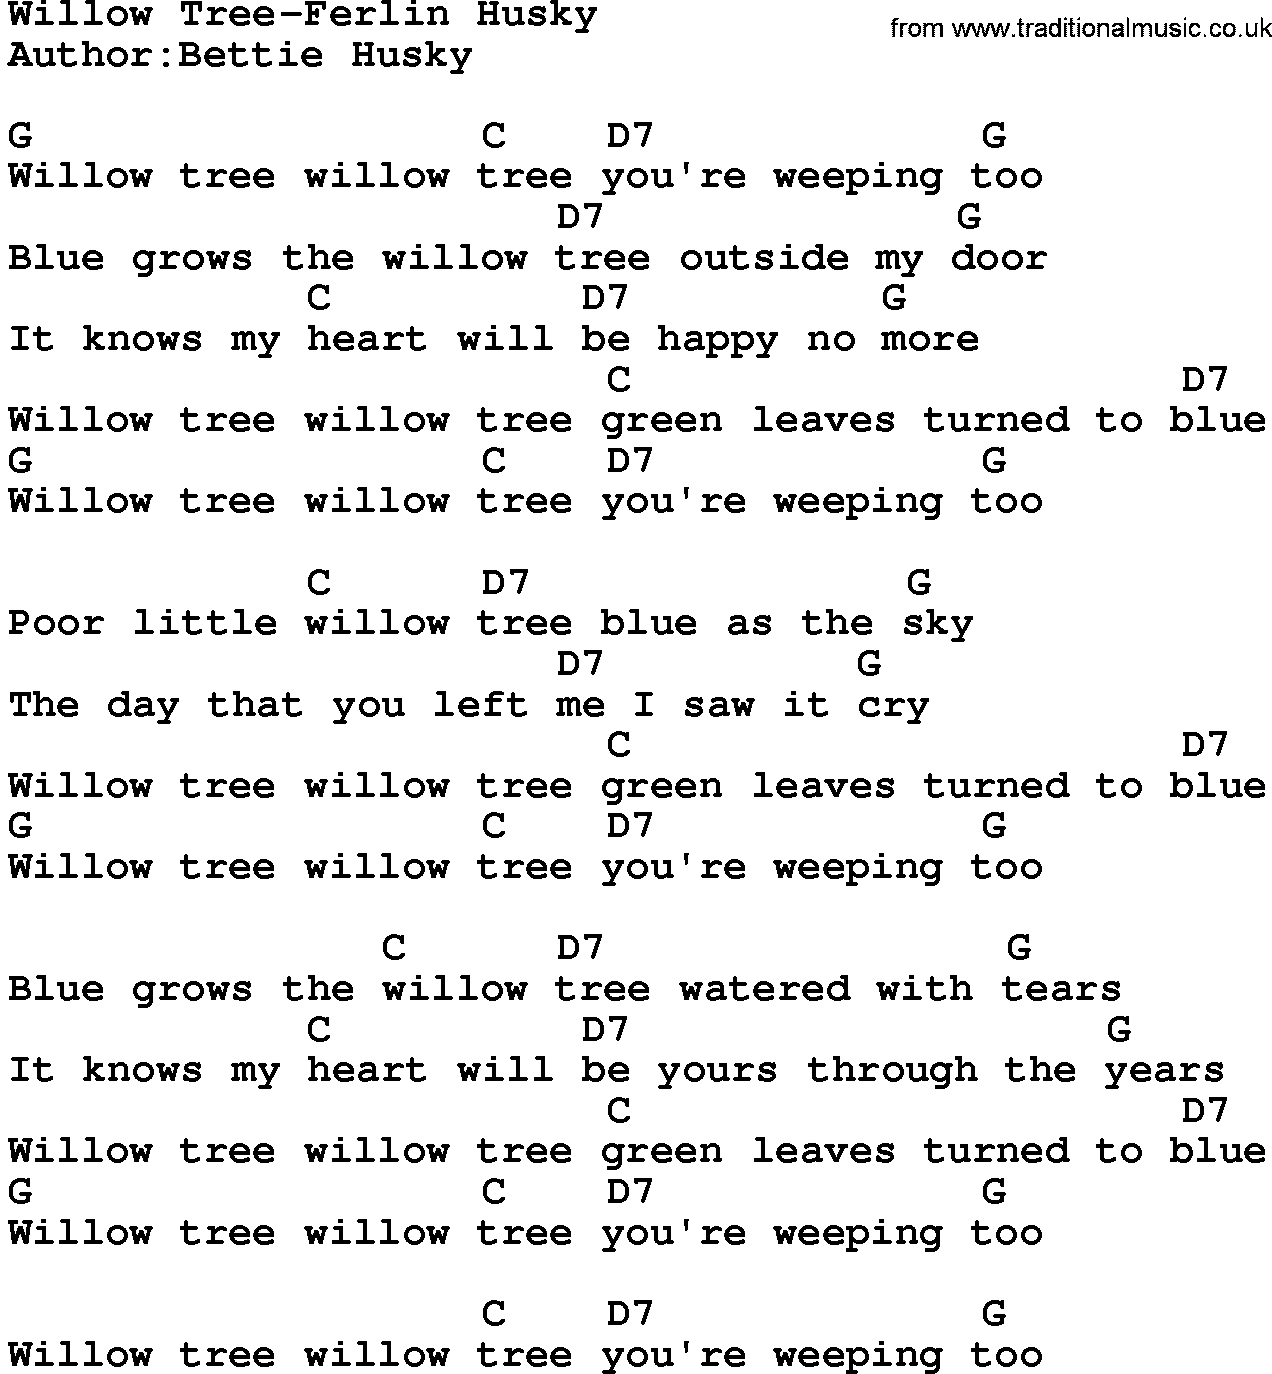 Country music song: Willow Tree-Ferlin Husky lyrics and chords